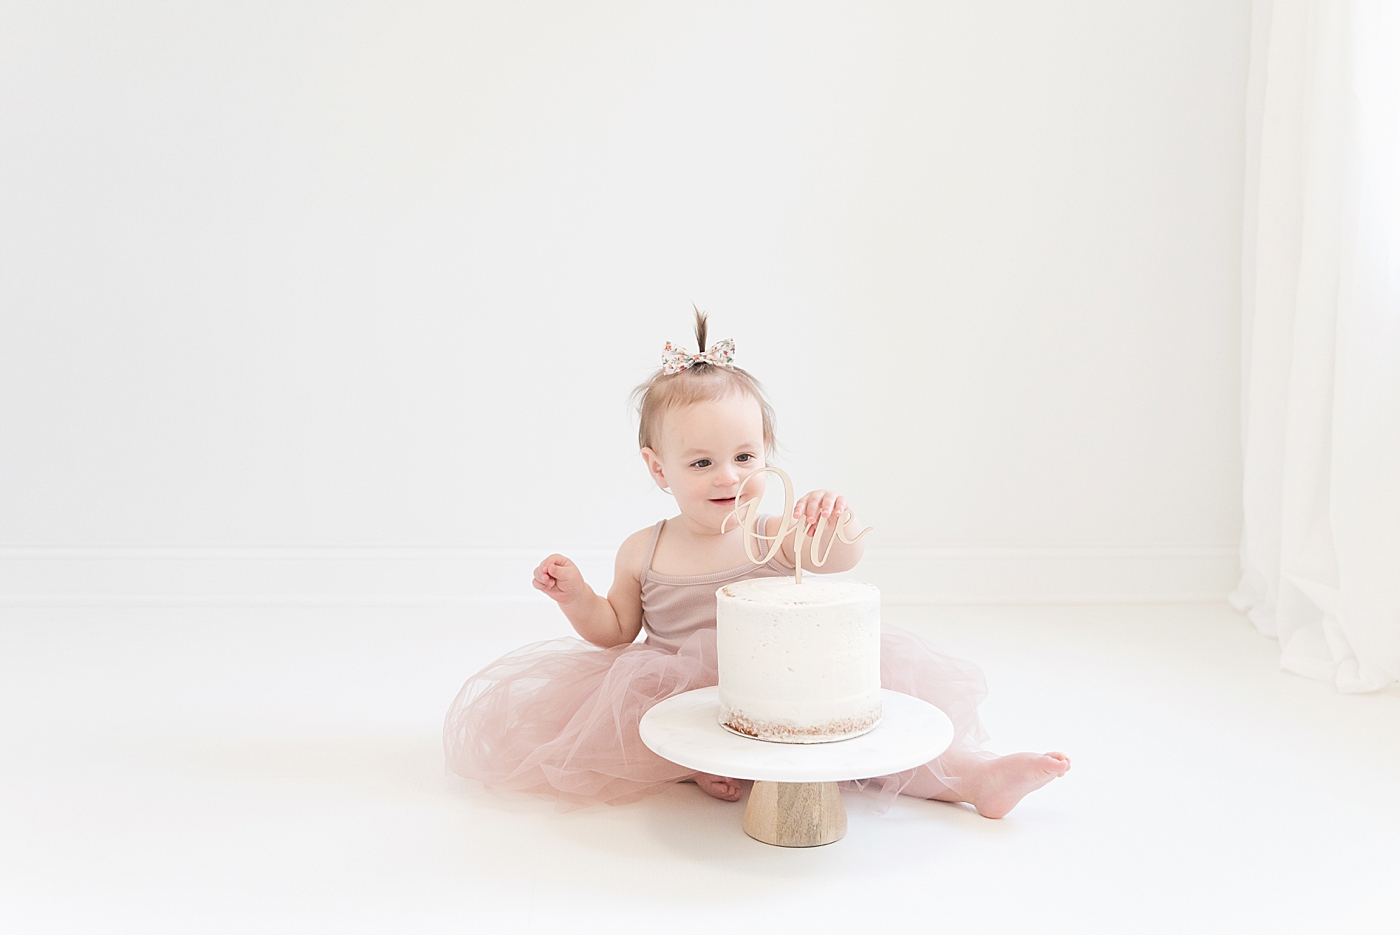 Baby girl playing with cake decorations on smash cake | Photo by Anna Wisjo Photography